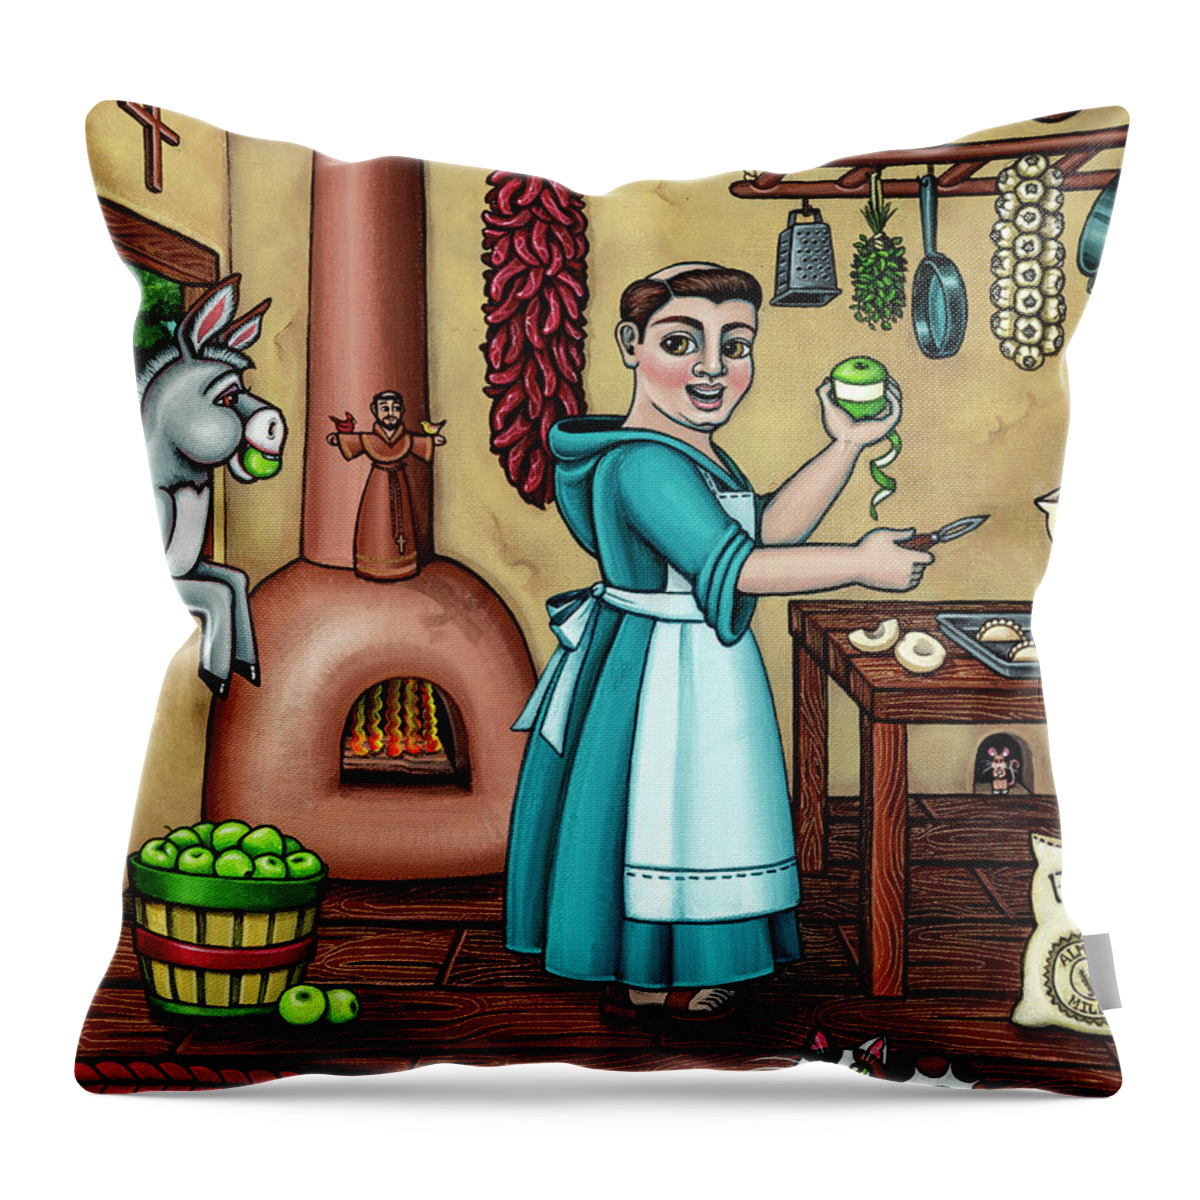 Hispanic Art Throw Pillow featuring the painting Burritos In The Kitchen by Victoria De Almeida